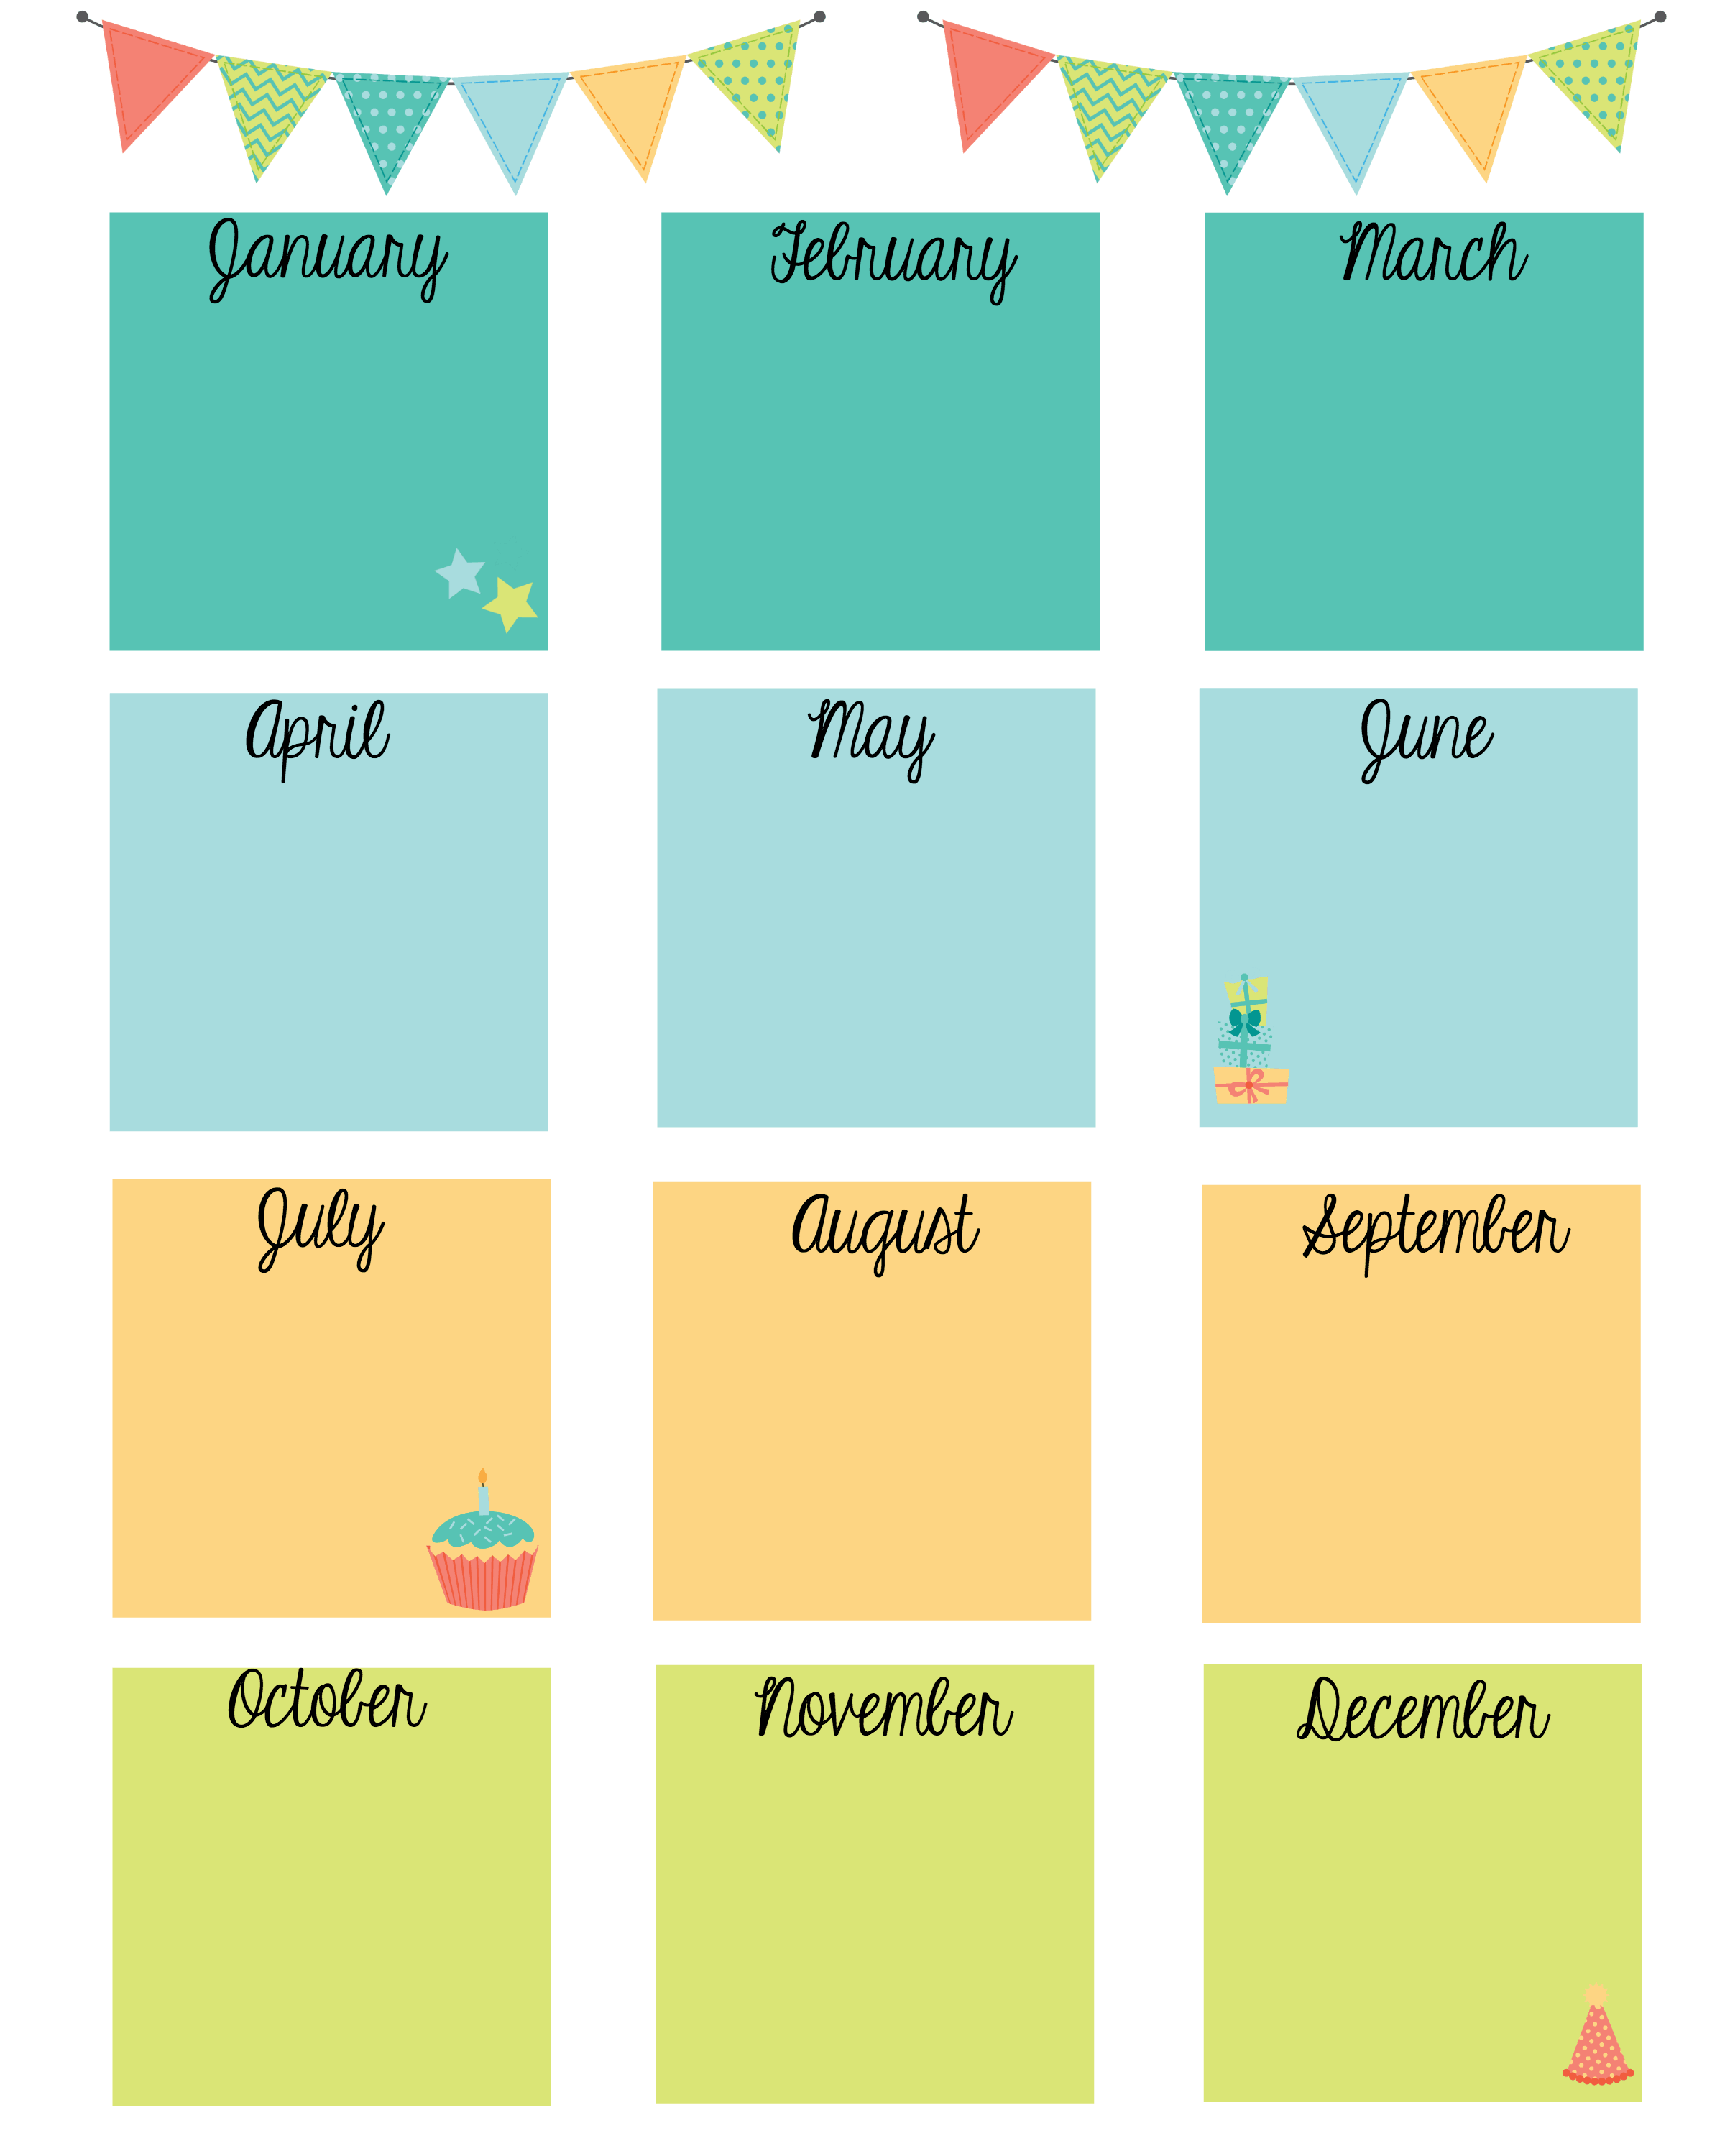 Never Forget A Birthday With This Free Birthday Calendar Printable